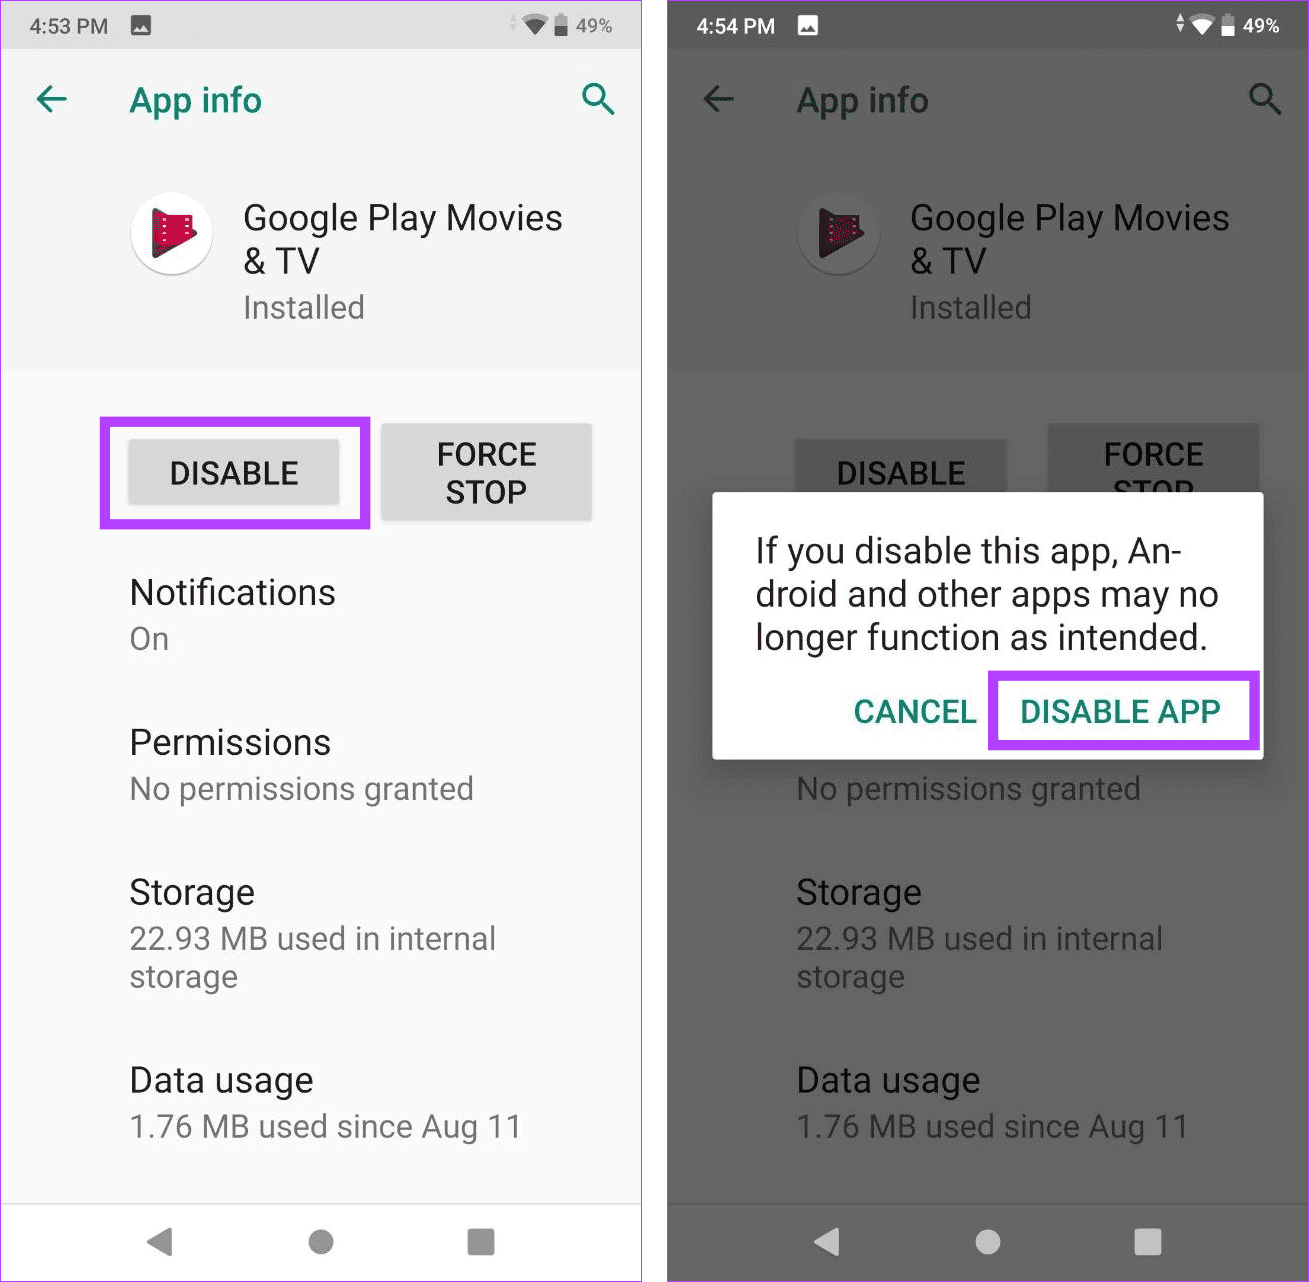 Disable App on Android